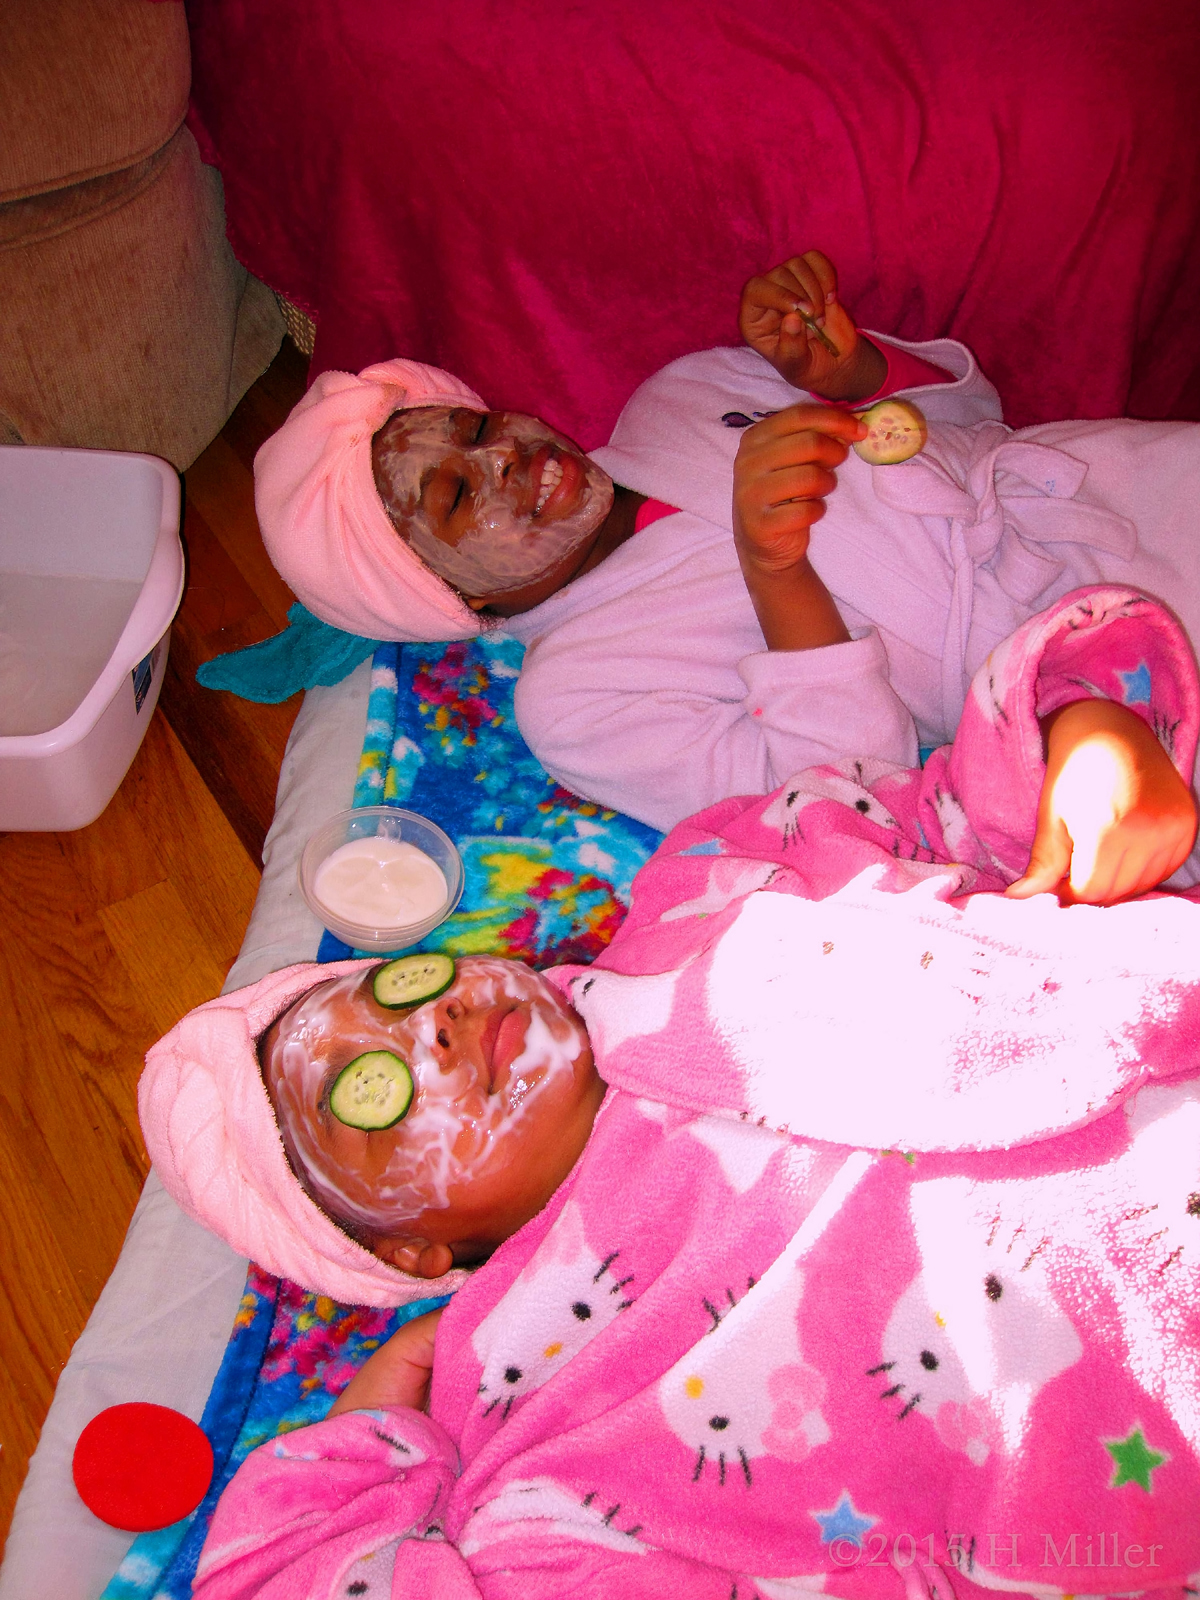 Both Girls Relaxing With Their Facial Masques. 